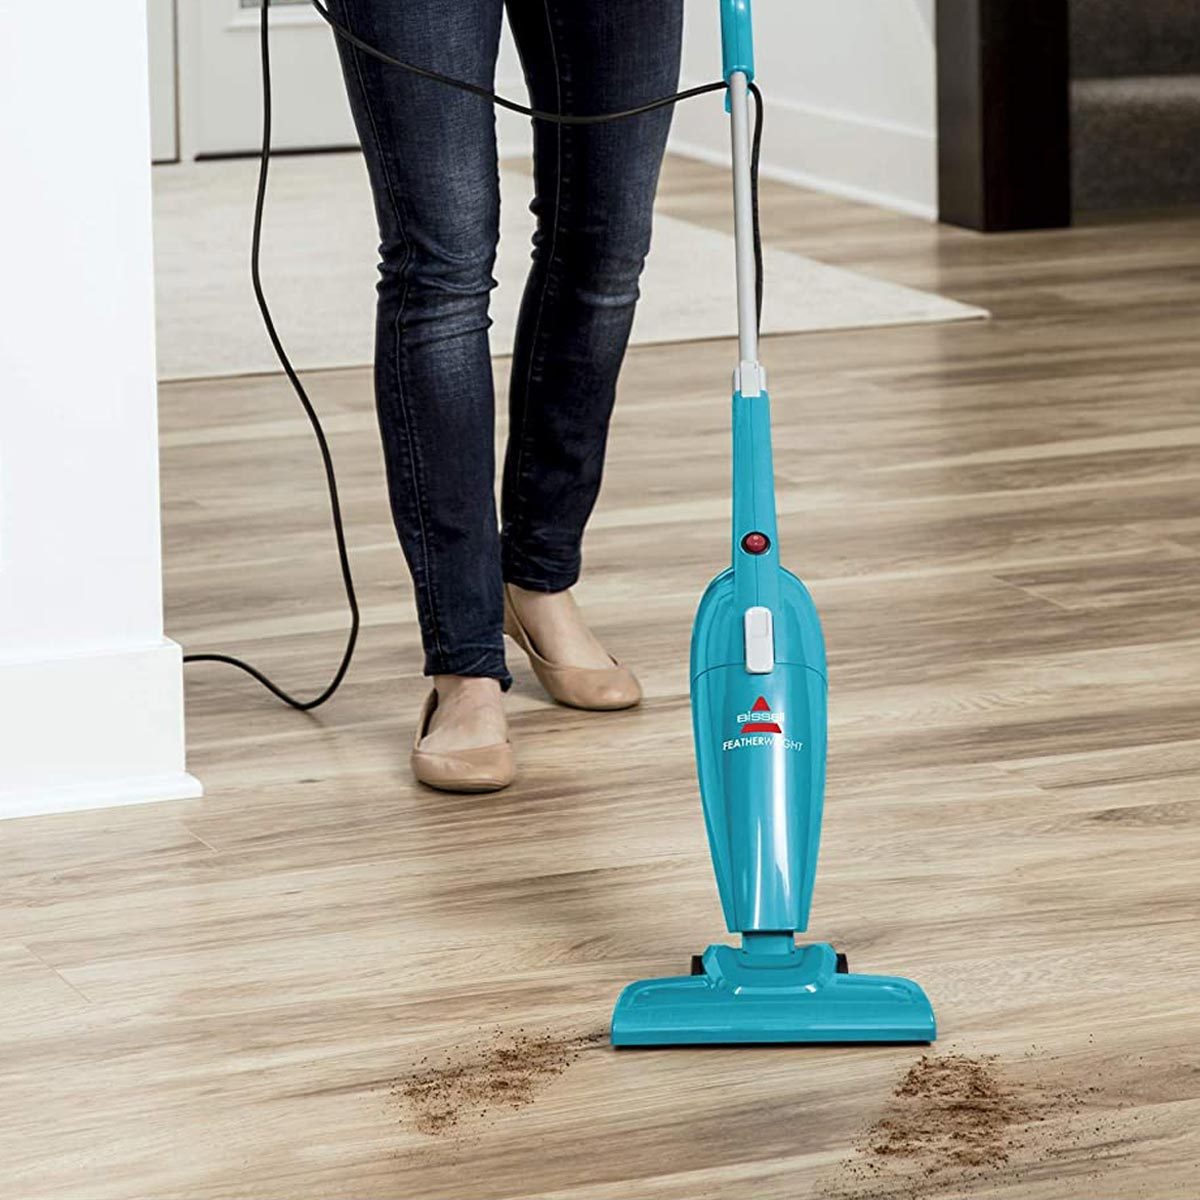 The 5 Best Brooms for Any Mess That Life Throws Your Way